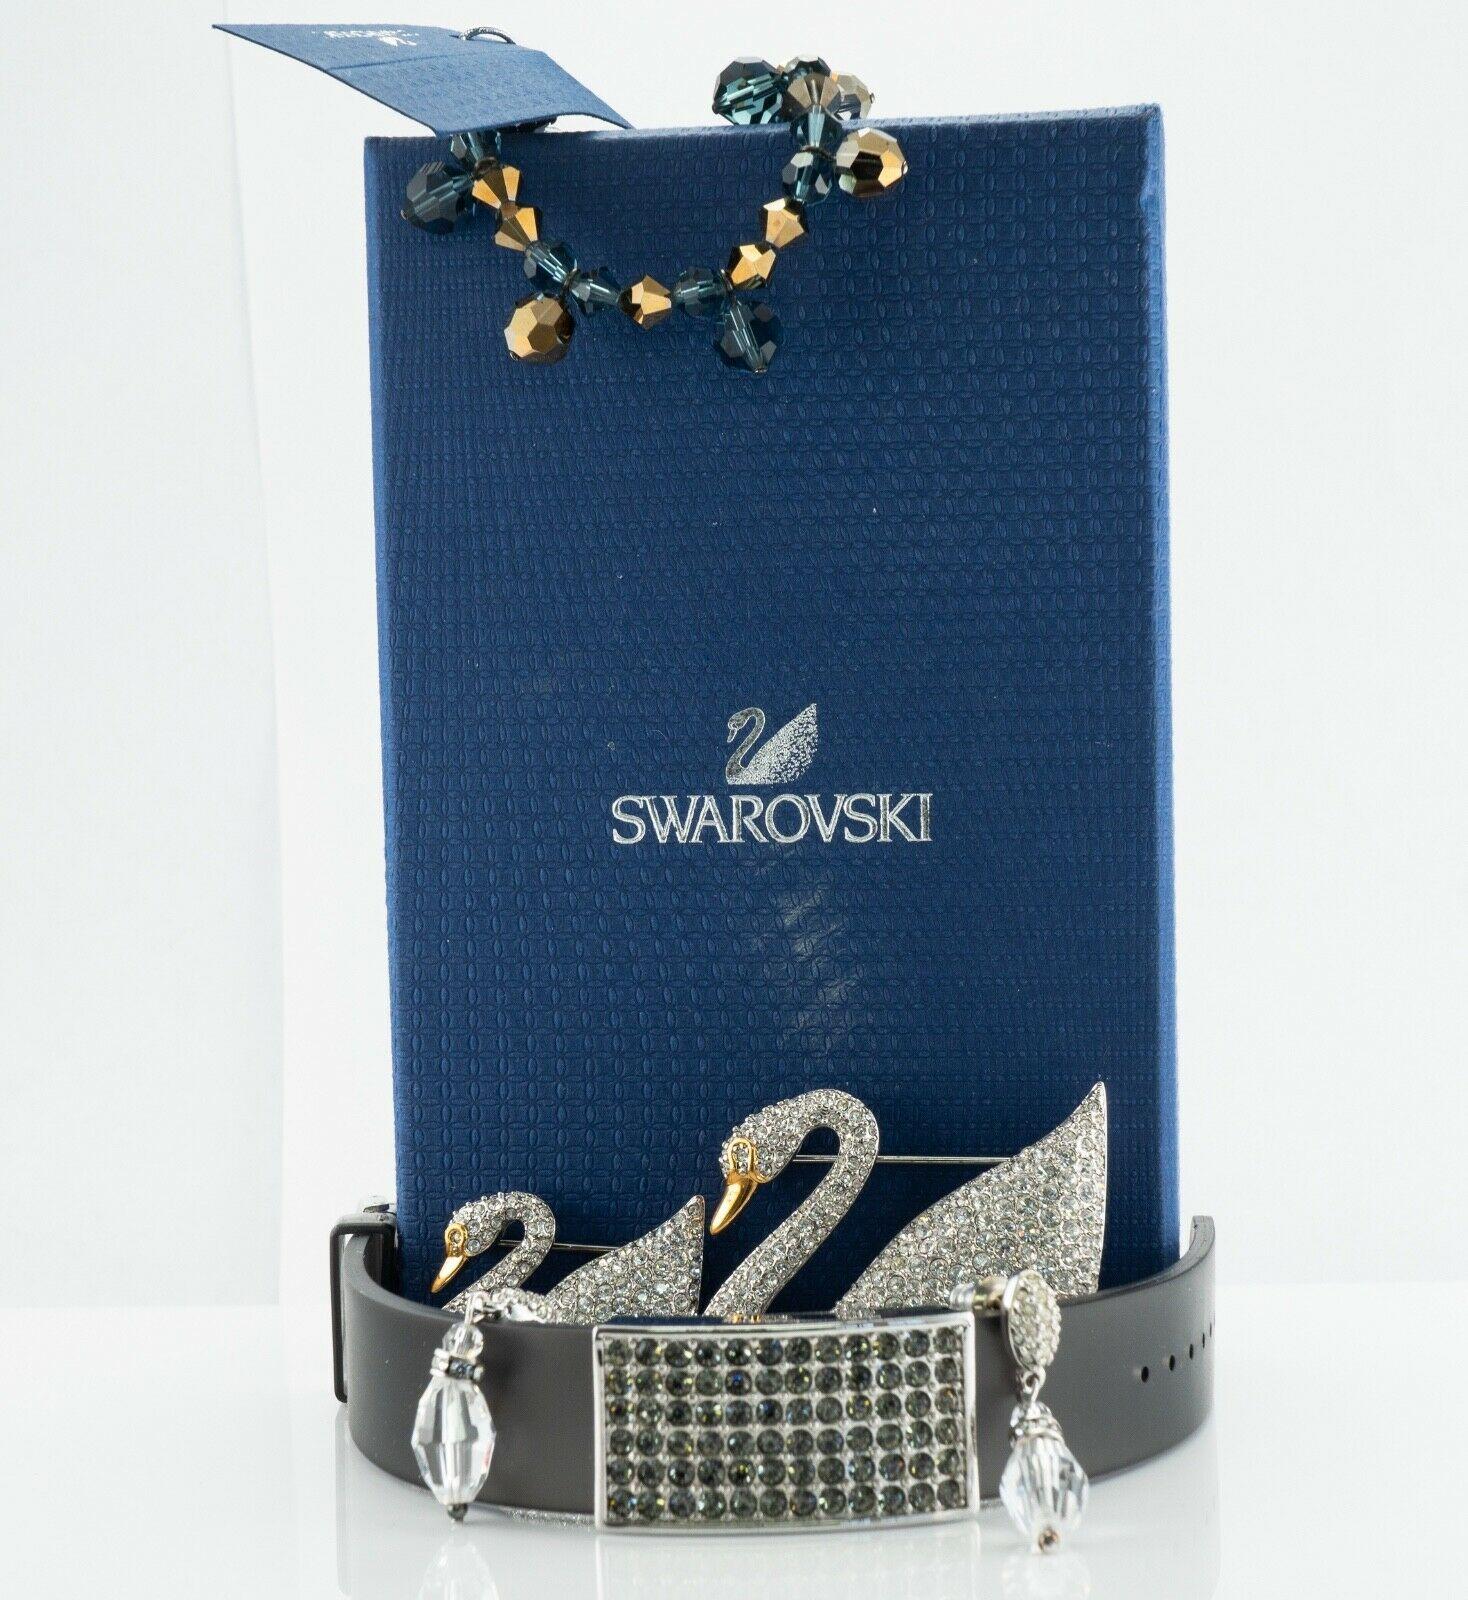 Swarovski Bracelets Swan Brooches Earrings Authentic Lot Box

This lot is for authentic Swarovski jewelry: two brooches or pins, two bracelets, and earrings. Two swans are different in size, one is 2.25